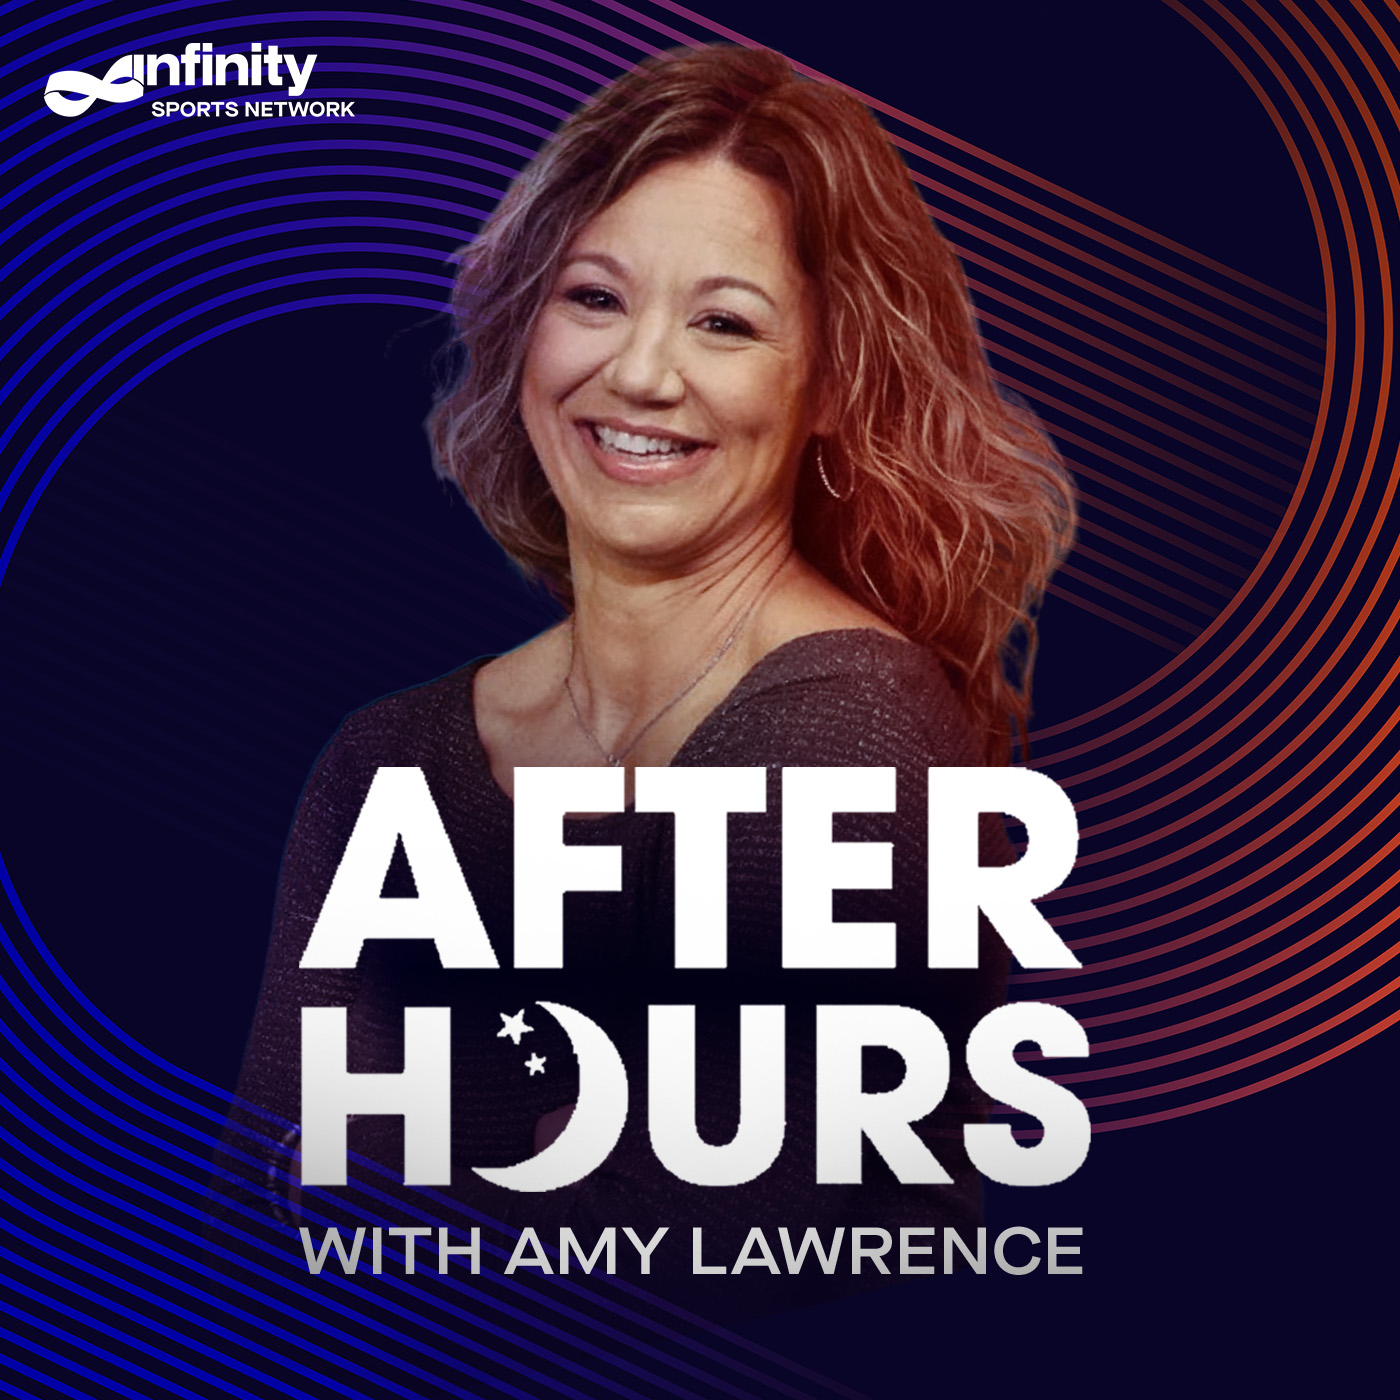 10-4-21 After Hours with Amy Lawrence PODCAST: Hour 3